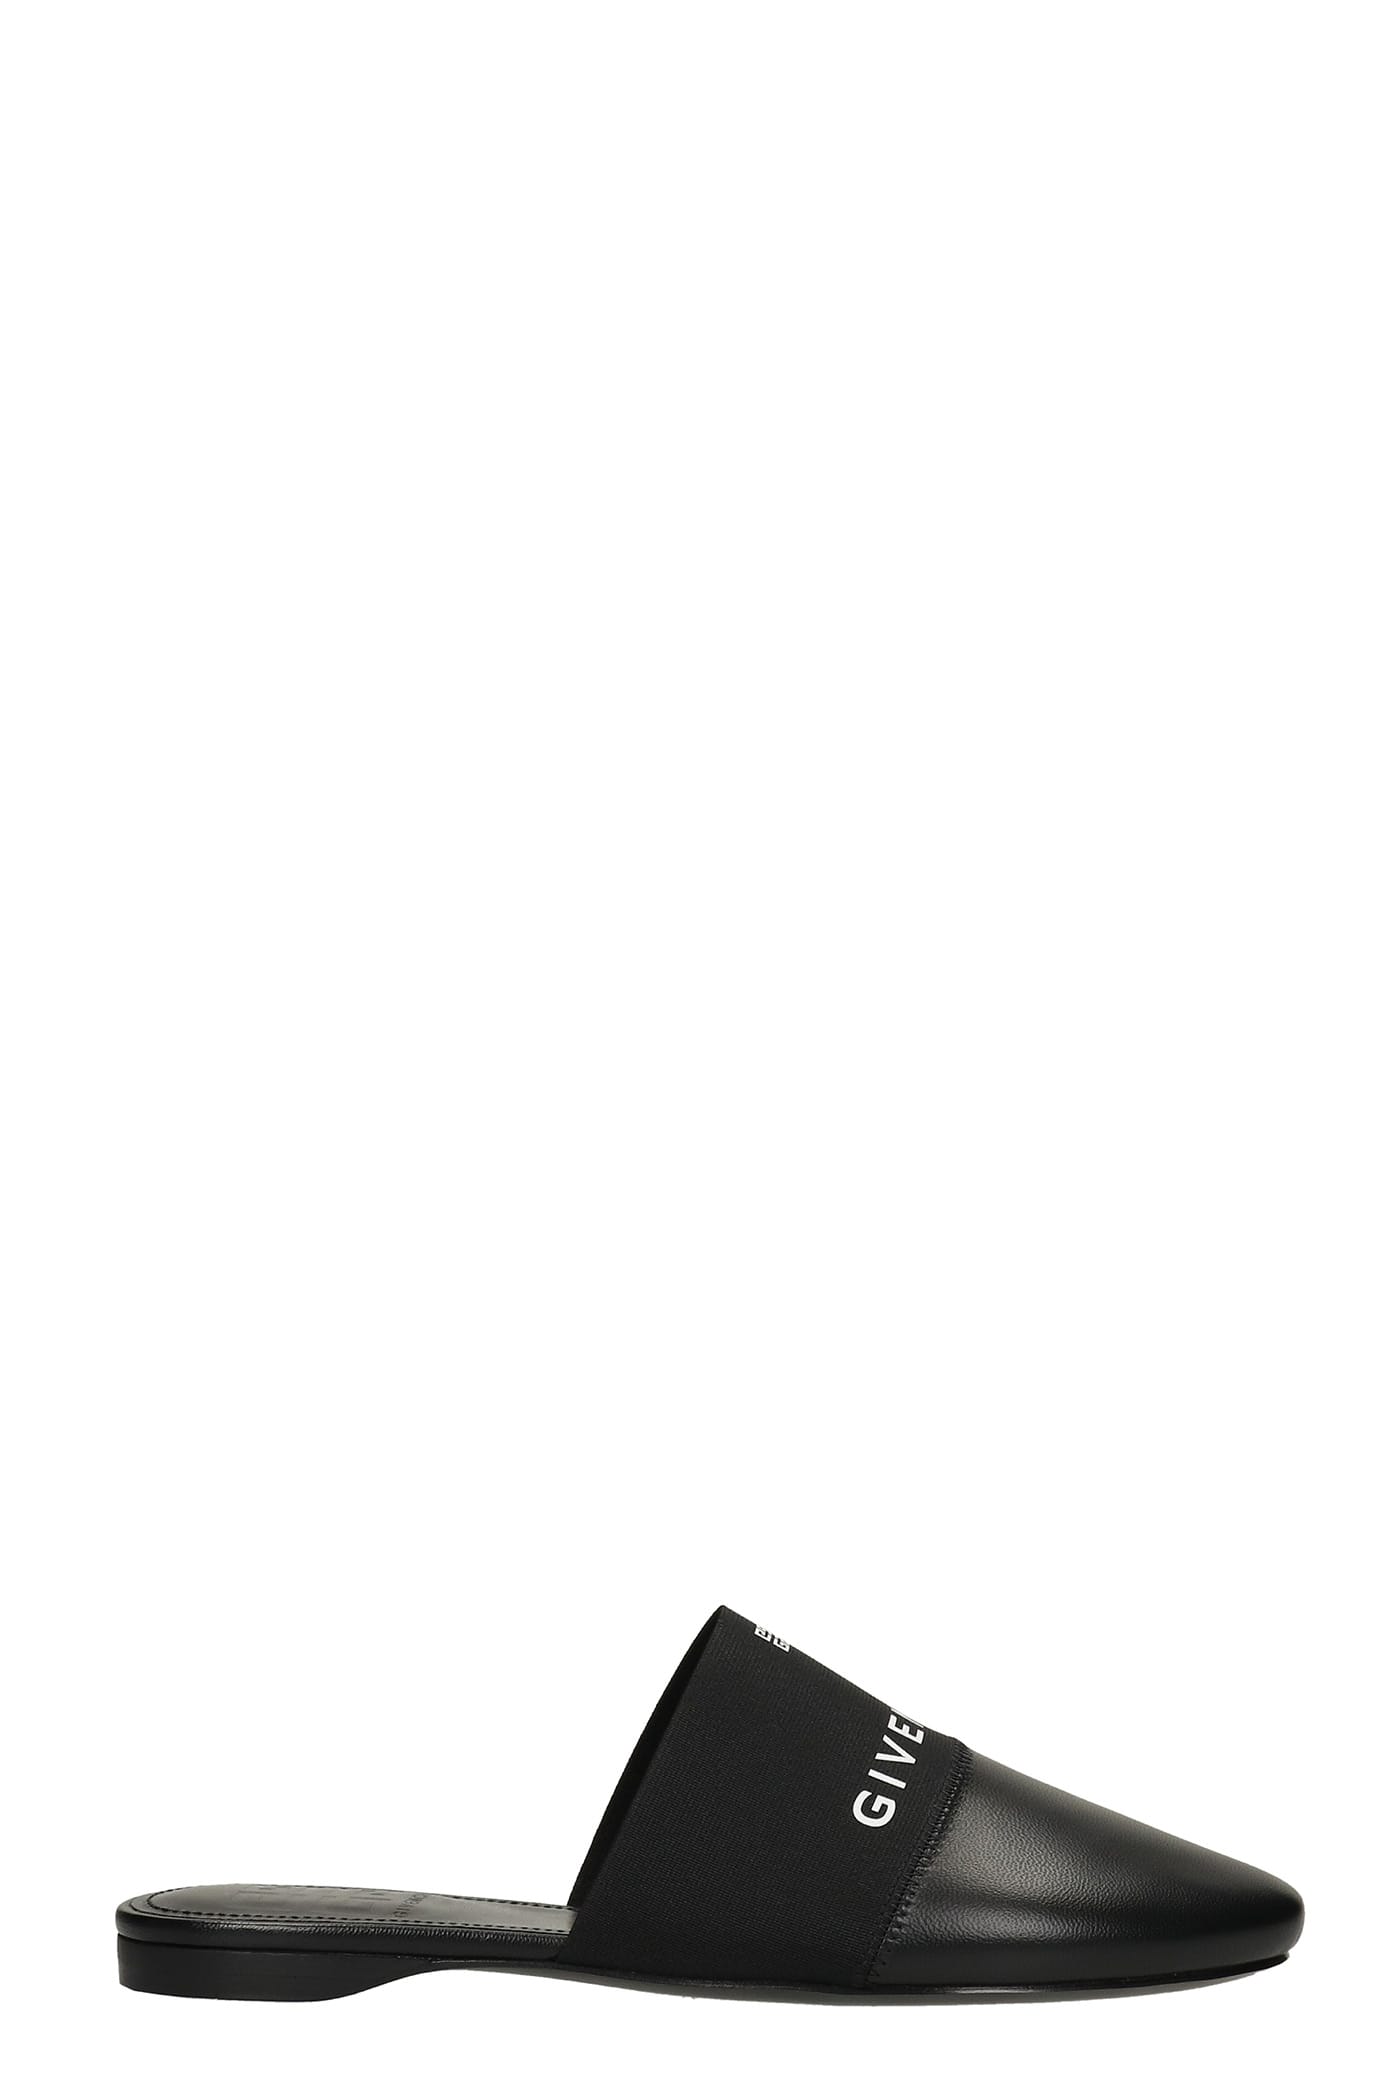 Givenchy Bedford Mules Loafers In Black Leather